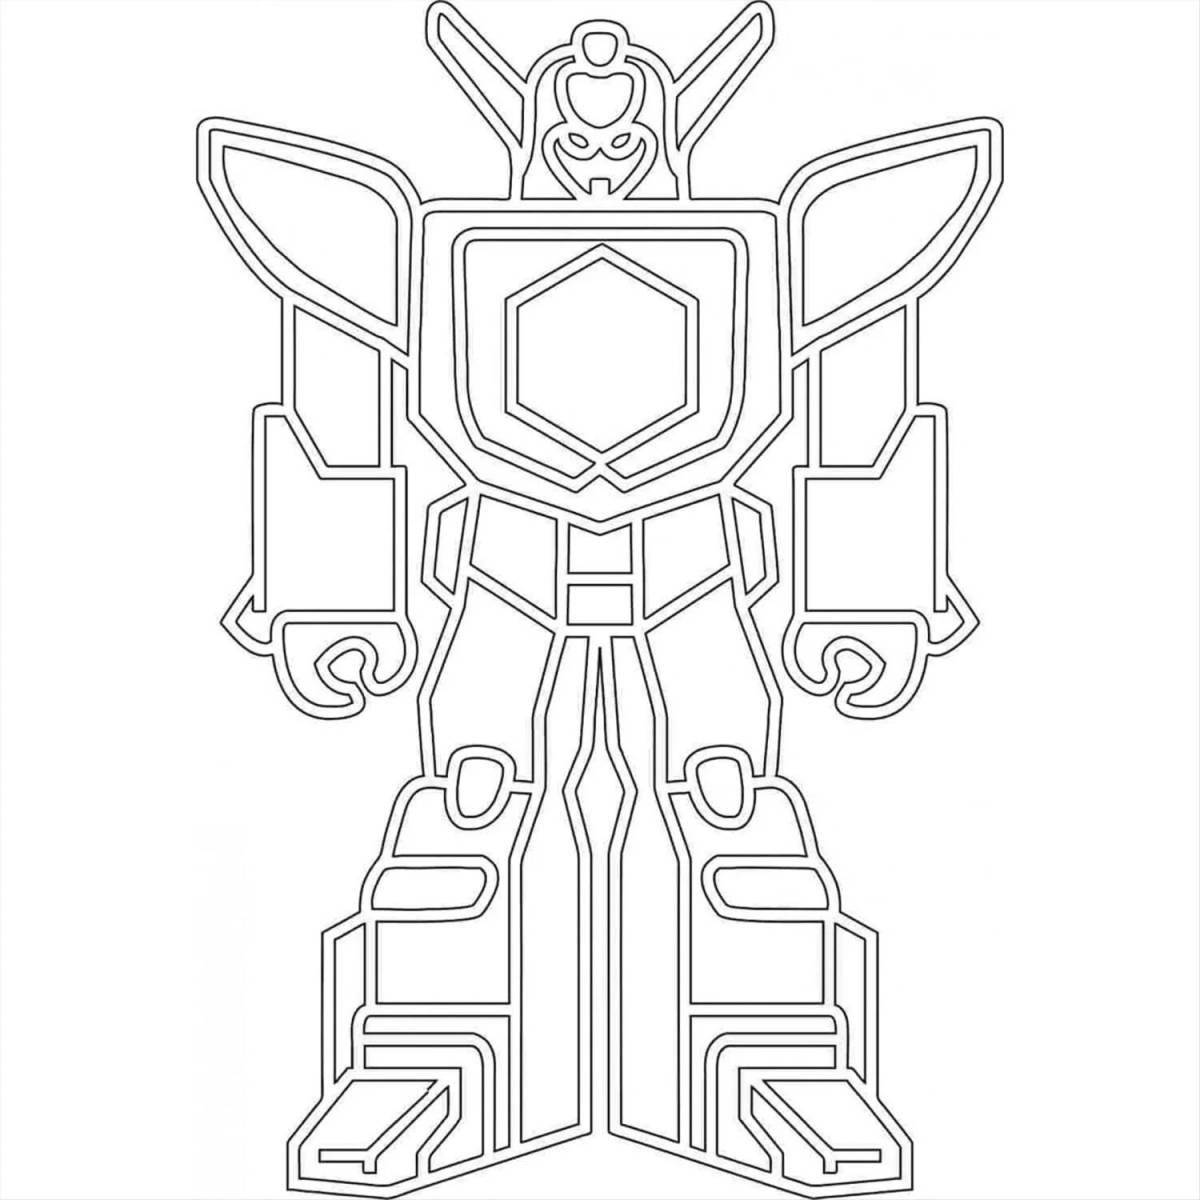 Coloring paper robot colorful-creator